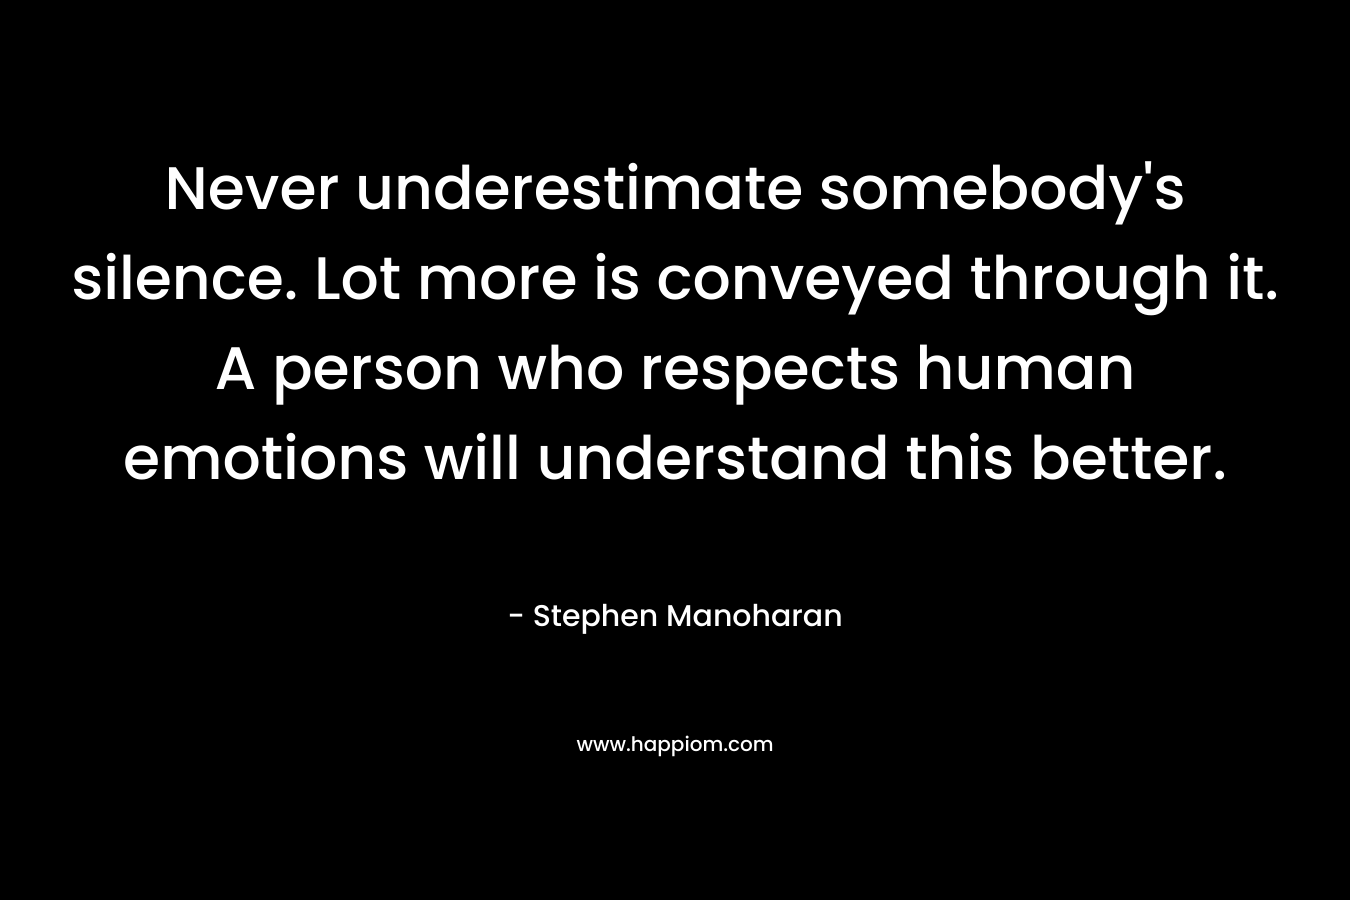 Never underestimate somebody’s silence. Lot more is conveyed through it. A person who respects human emotions will understand this better. – Stephen Manoharan